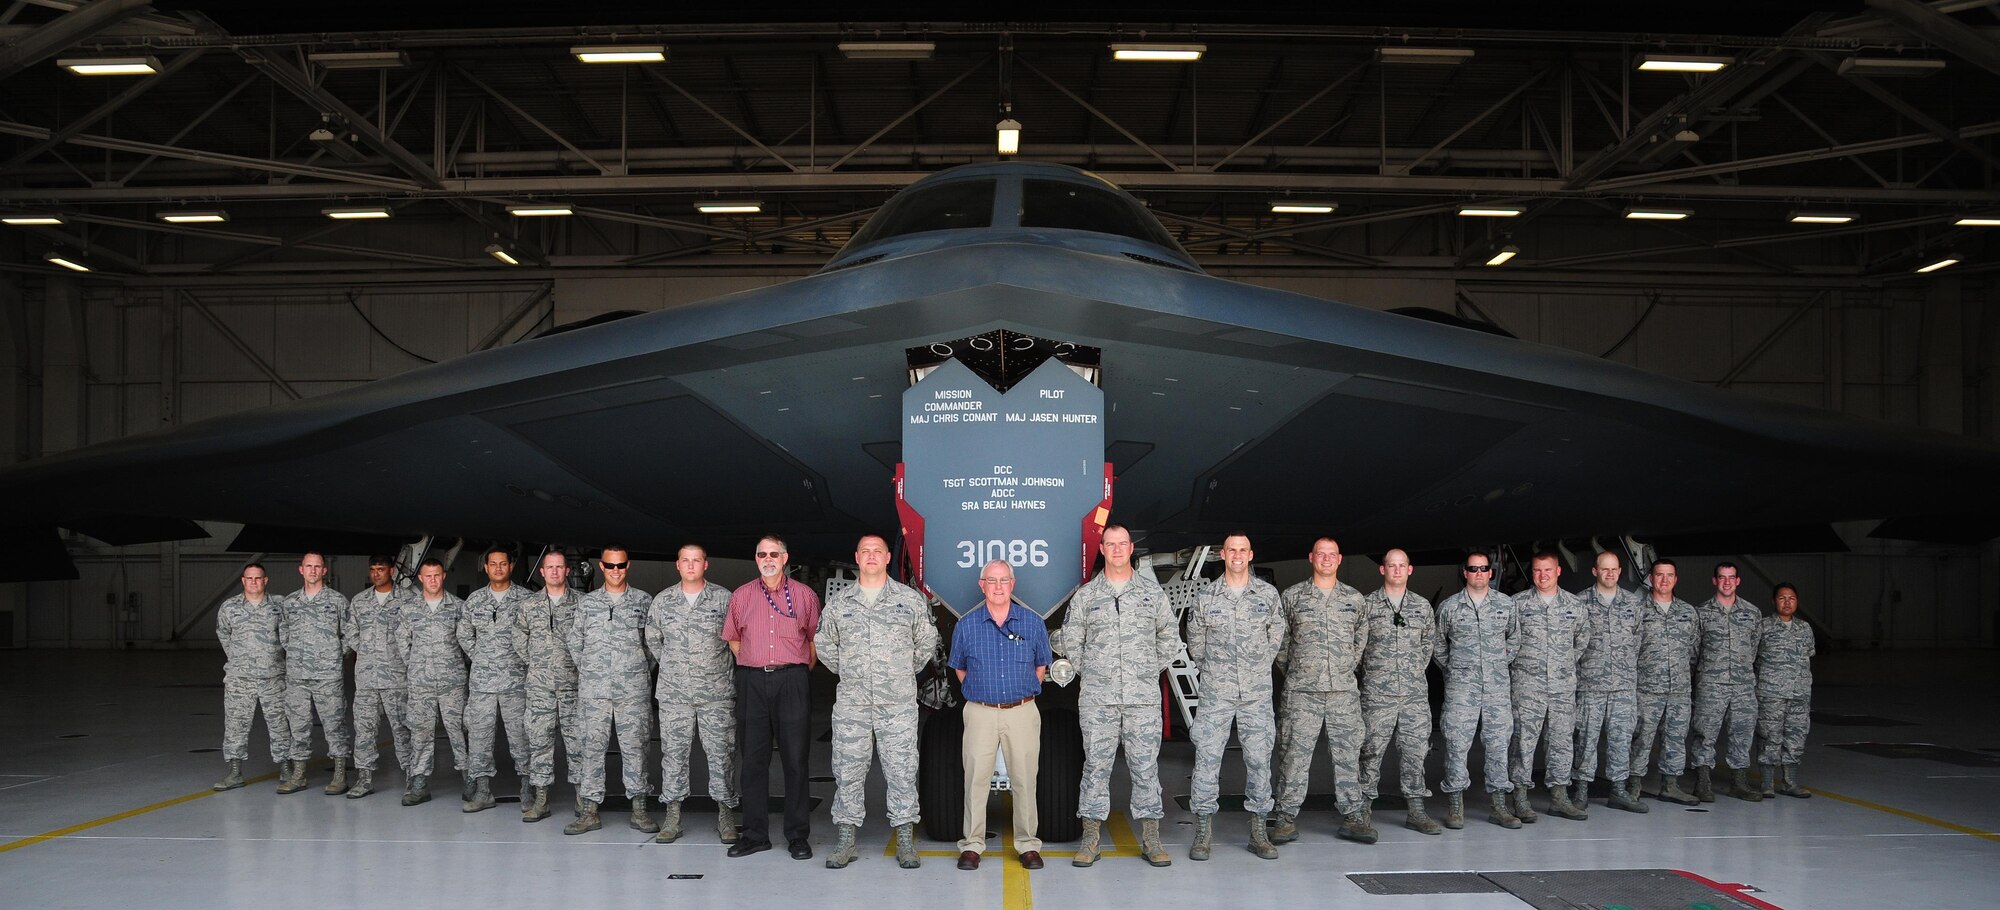 The 372d Training Squadron Field Training Detachment 6 at Whiteman Air Force Base, Missouri is the ONLY operational B-2 maintenance training location.  